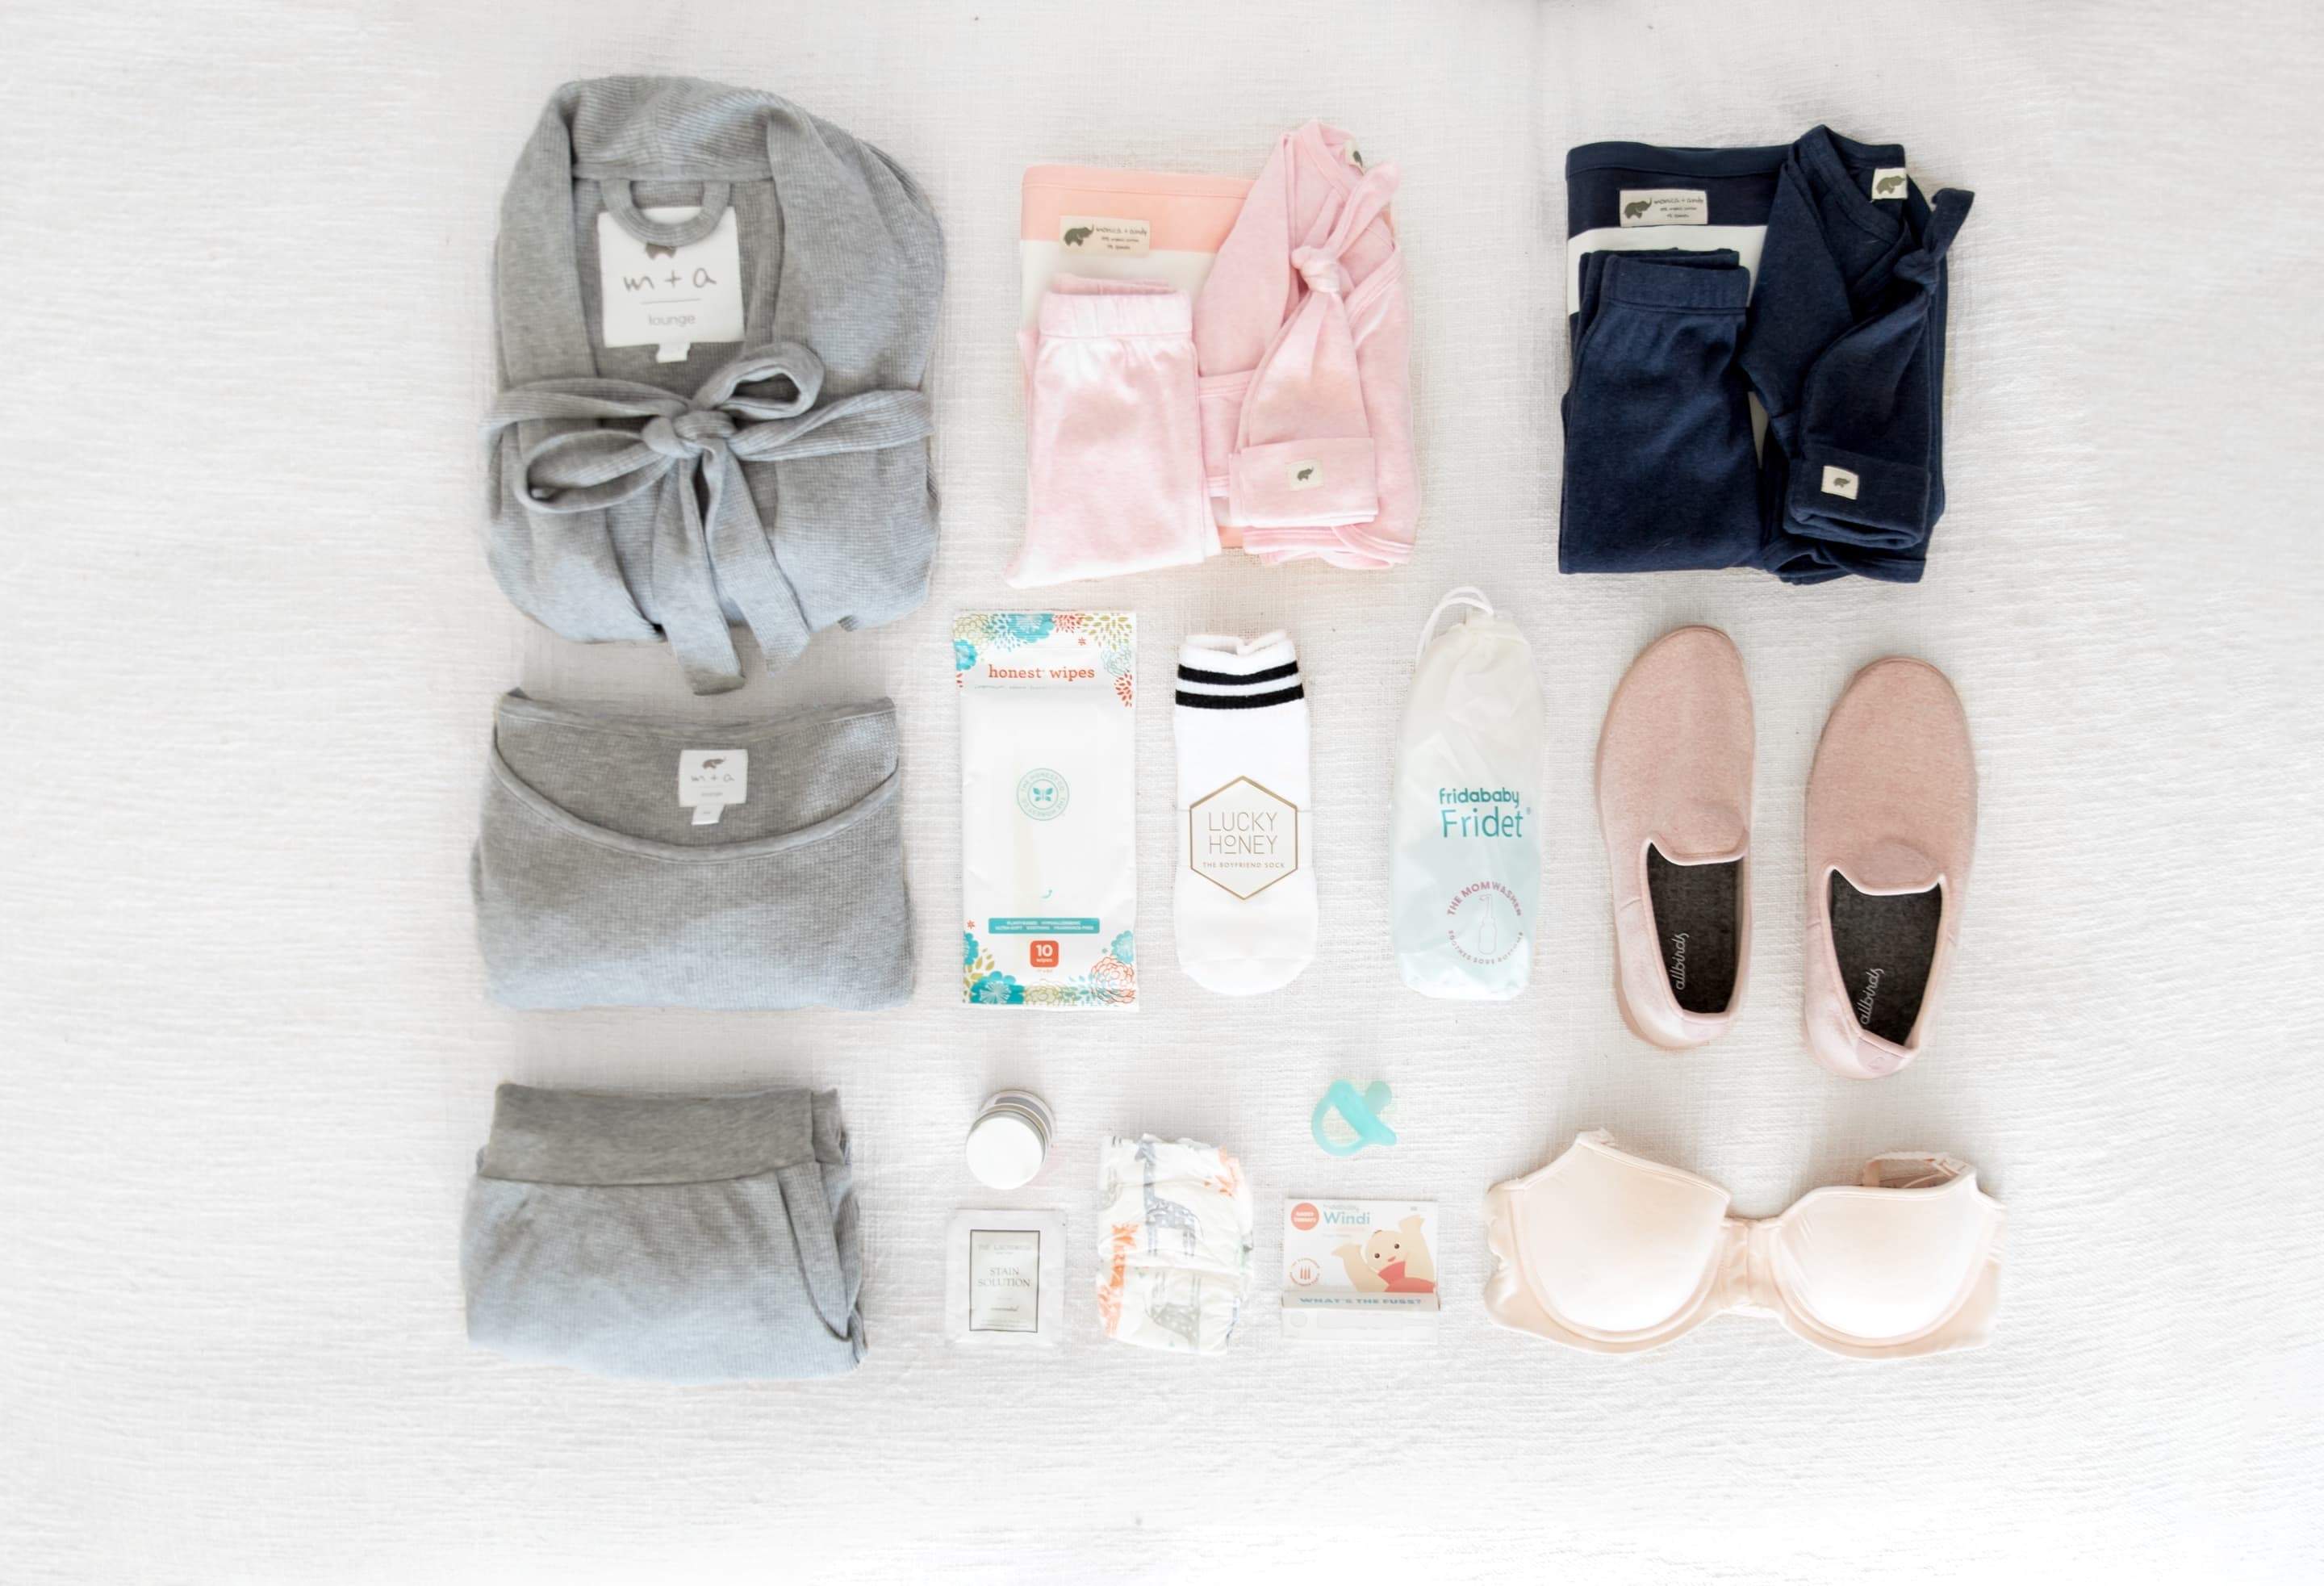 Hospital Diaper Bag Checklist: What to Pack - Monica + Andy